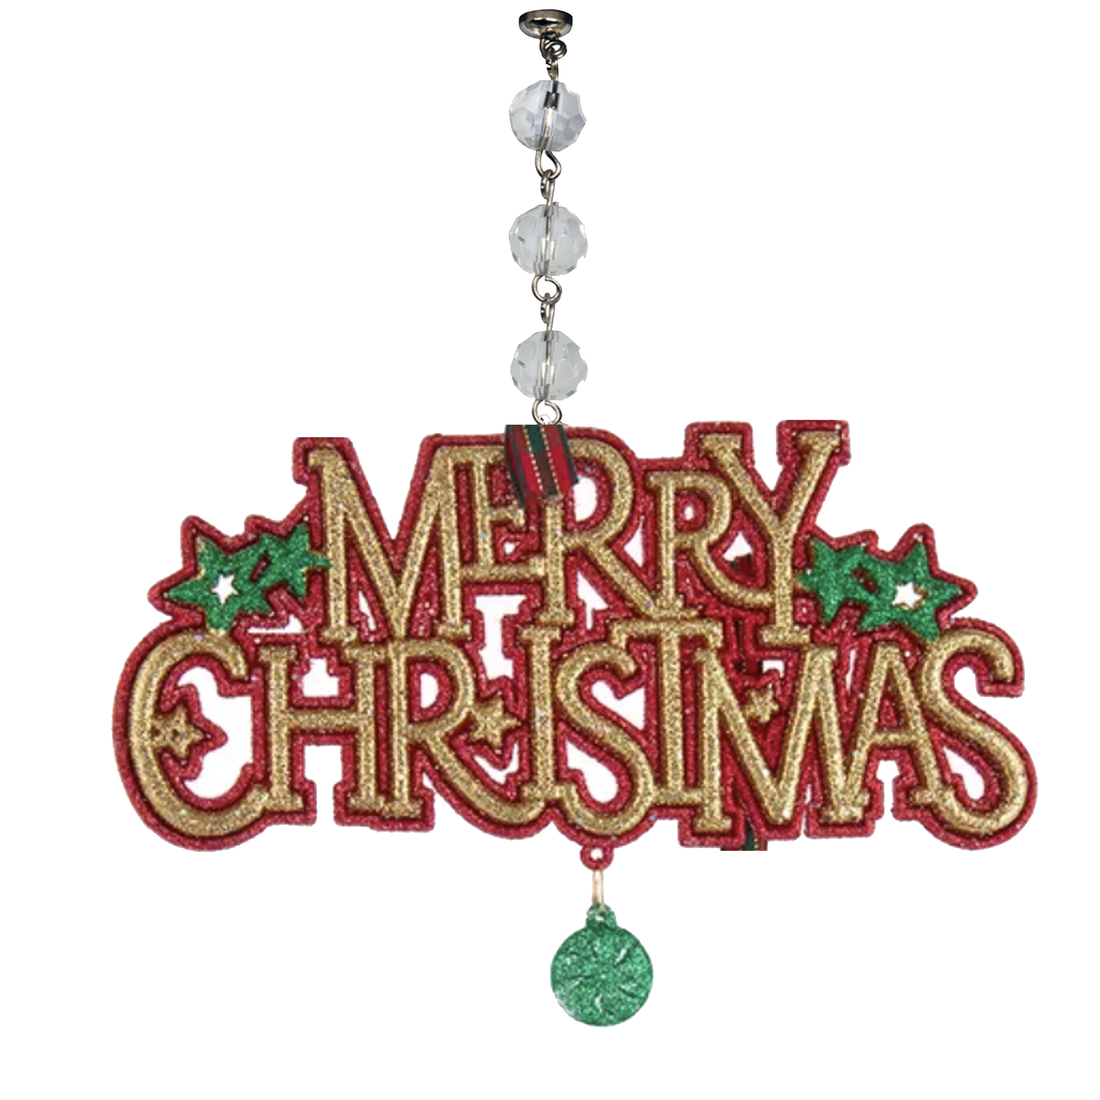 RED/GOLD MERRY CHRISTMAS (Set/3) MAGNETIC CHANDELIER ORNAMENT